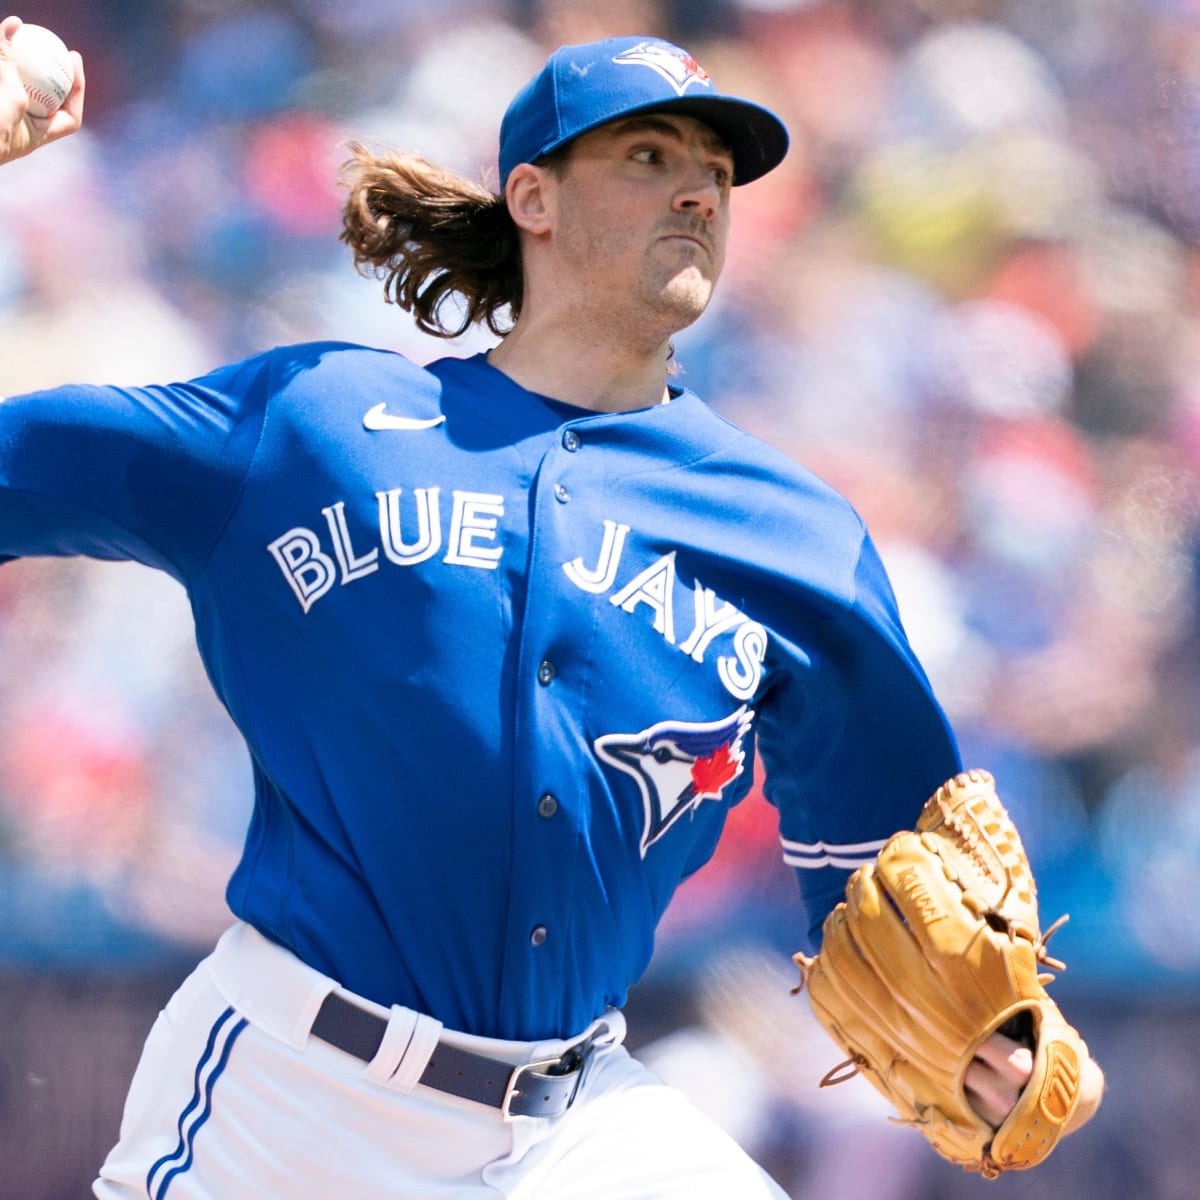 CLEVELAND, OH - MAY 7: Toronto Blue Jays starting pitcher Kevin